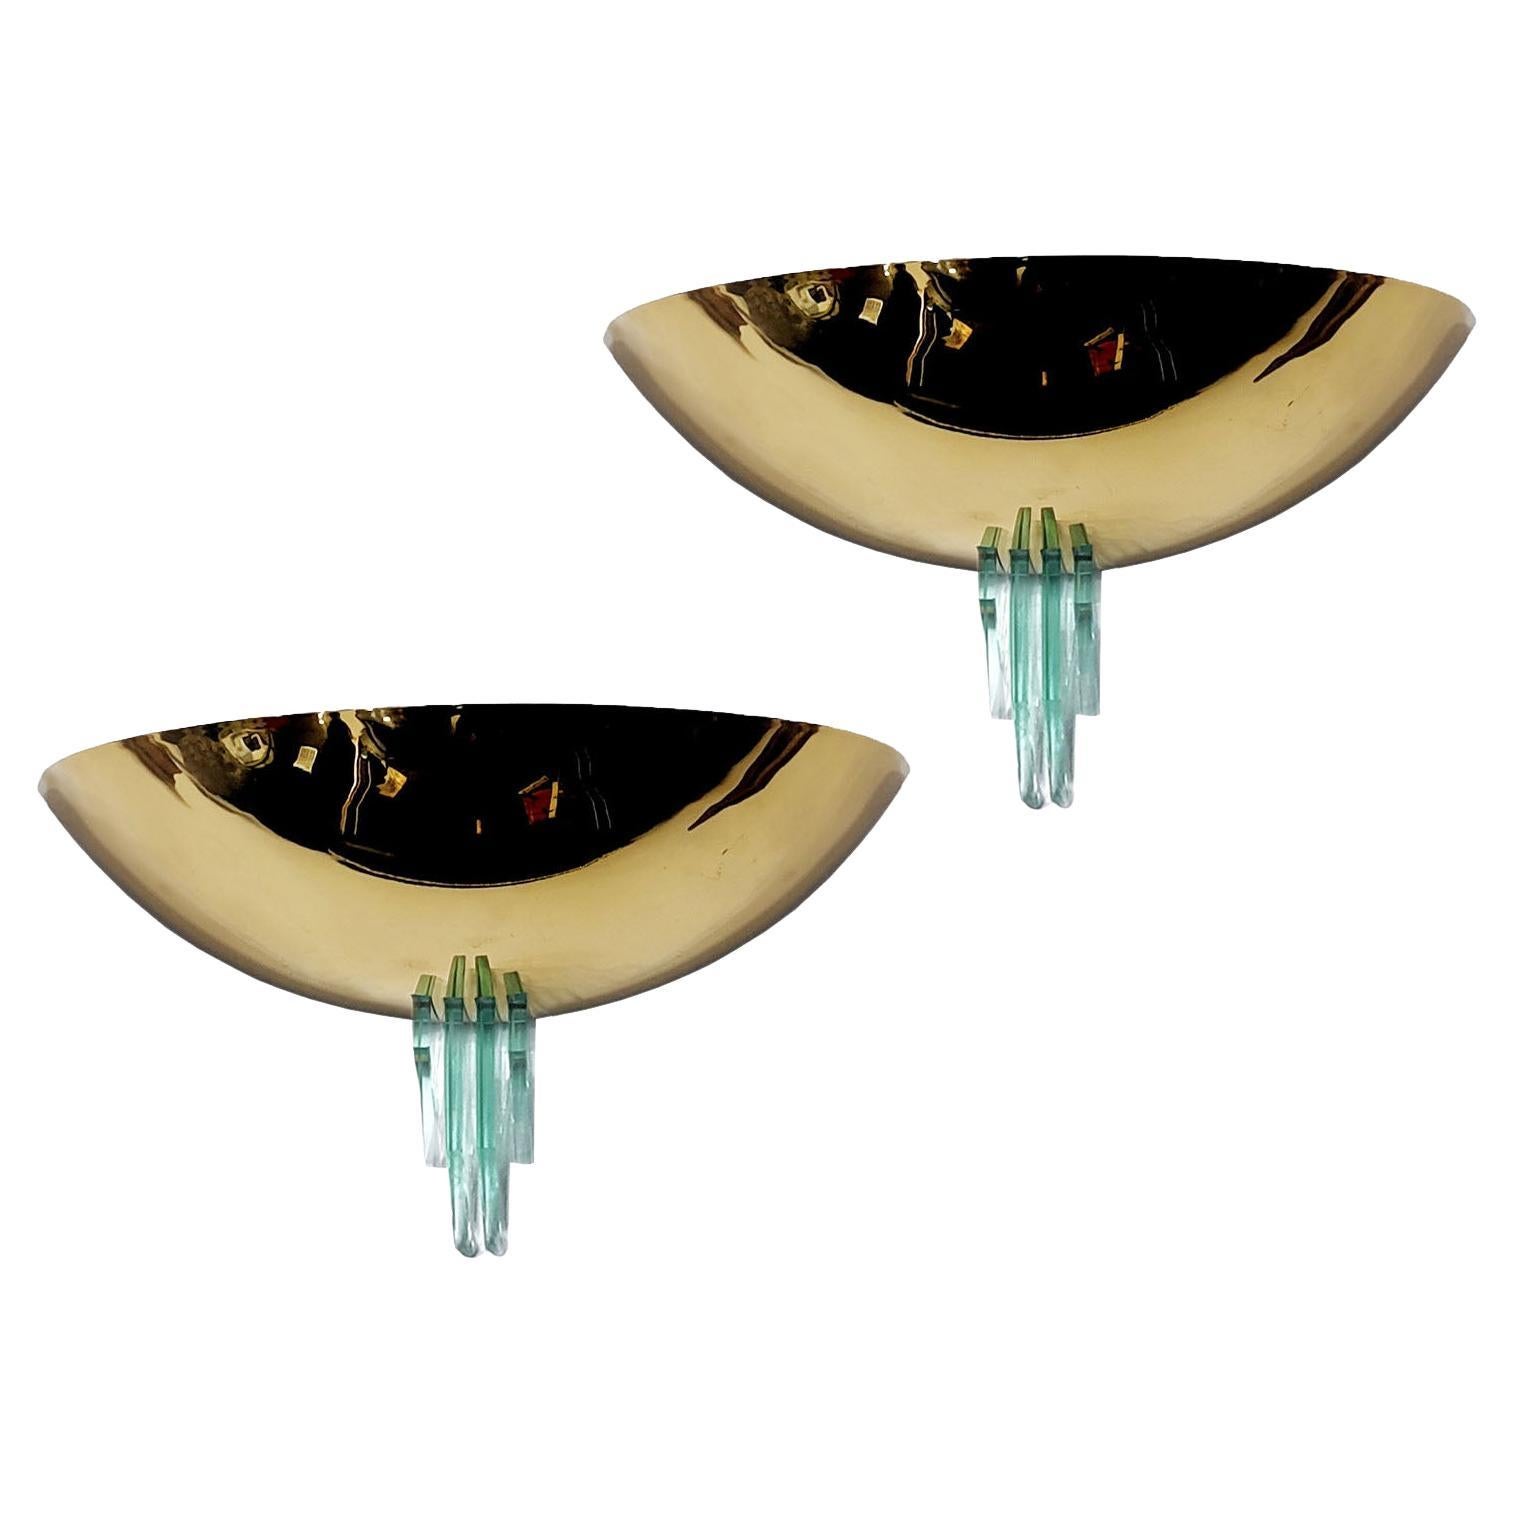 Art Deco Style Pair of Wall Lights made of Brass and Glass